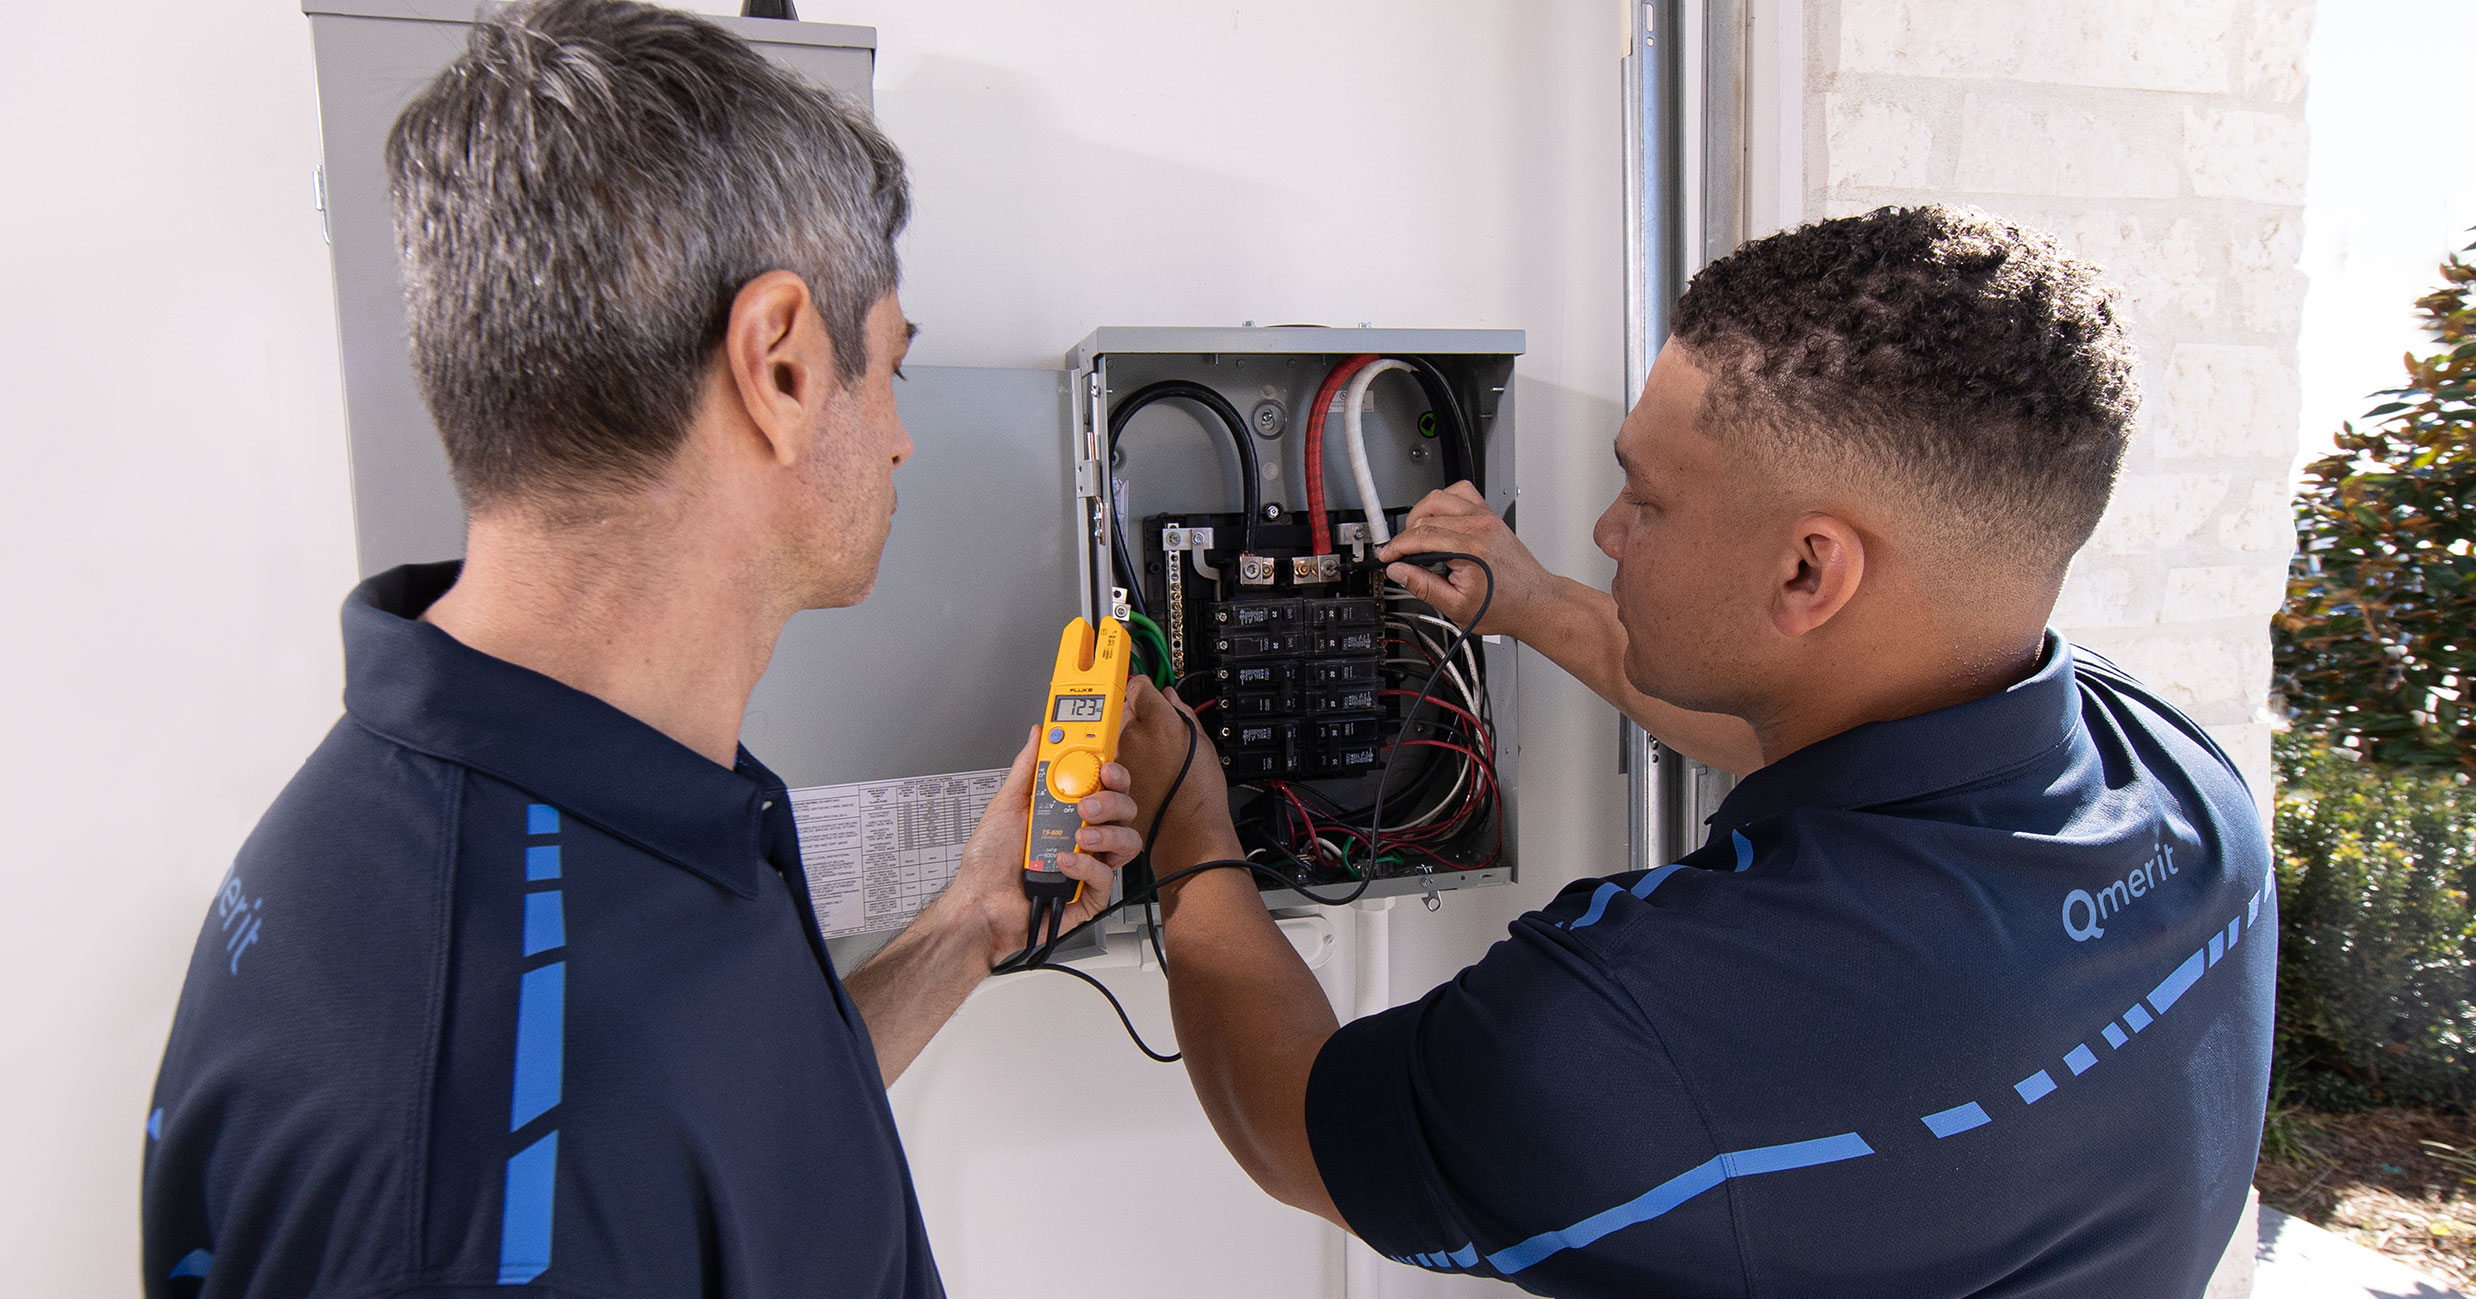 Qmerit will offer instruction and certification for electricians